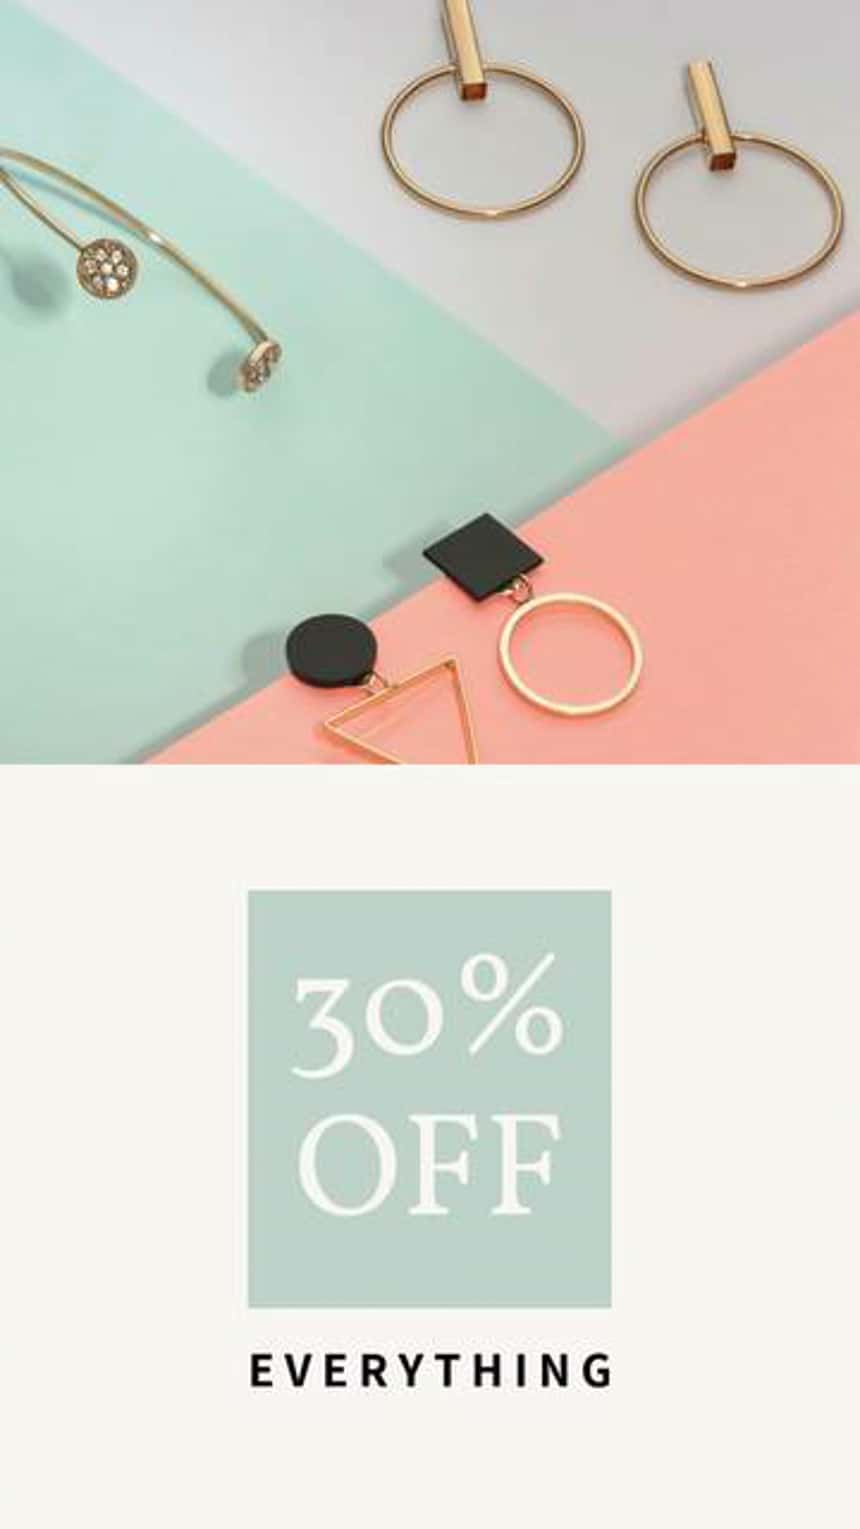 Facebook video ad template advertising a sale. The image shows various jewelry against a flat lay, and text reads 